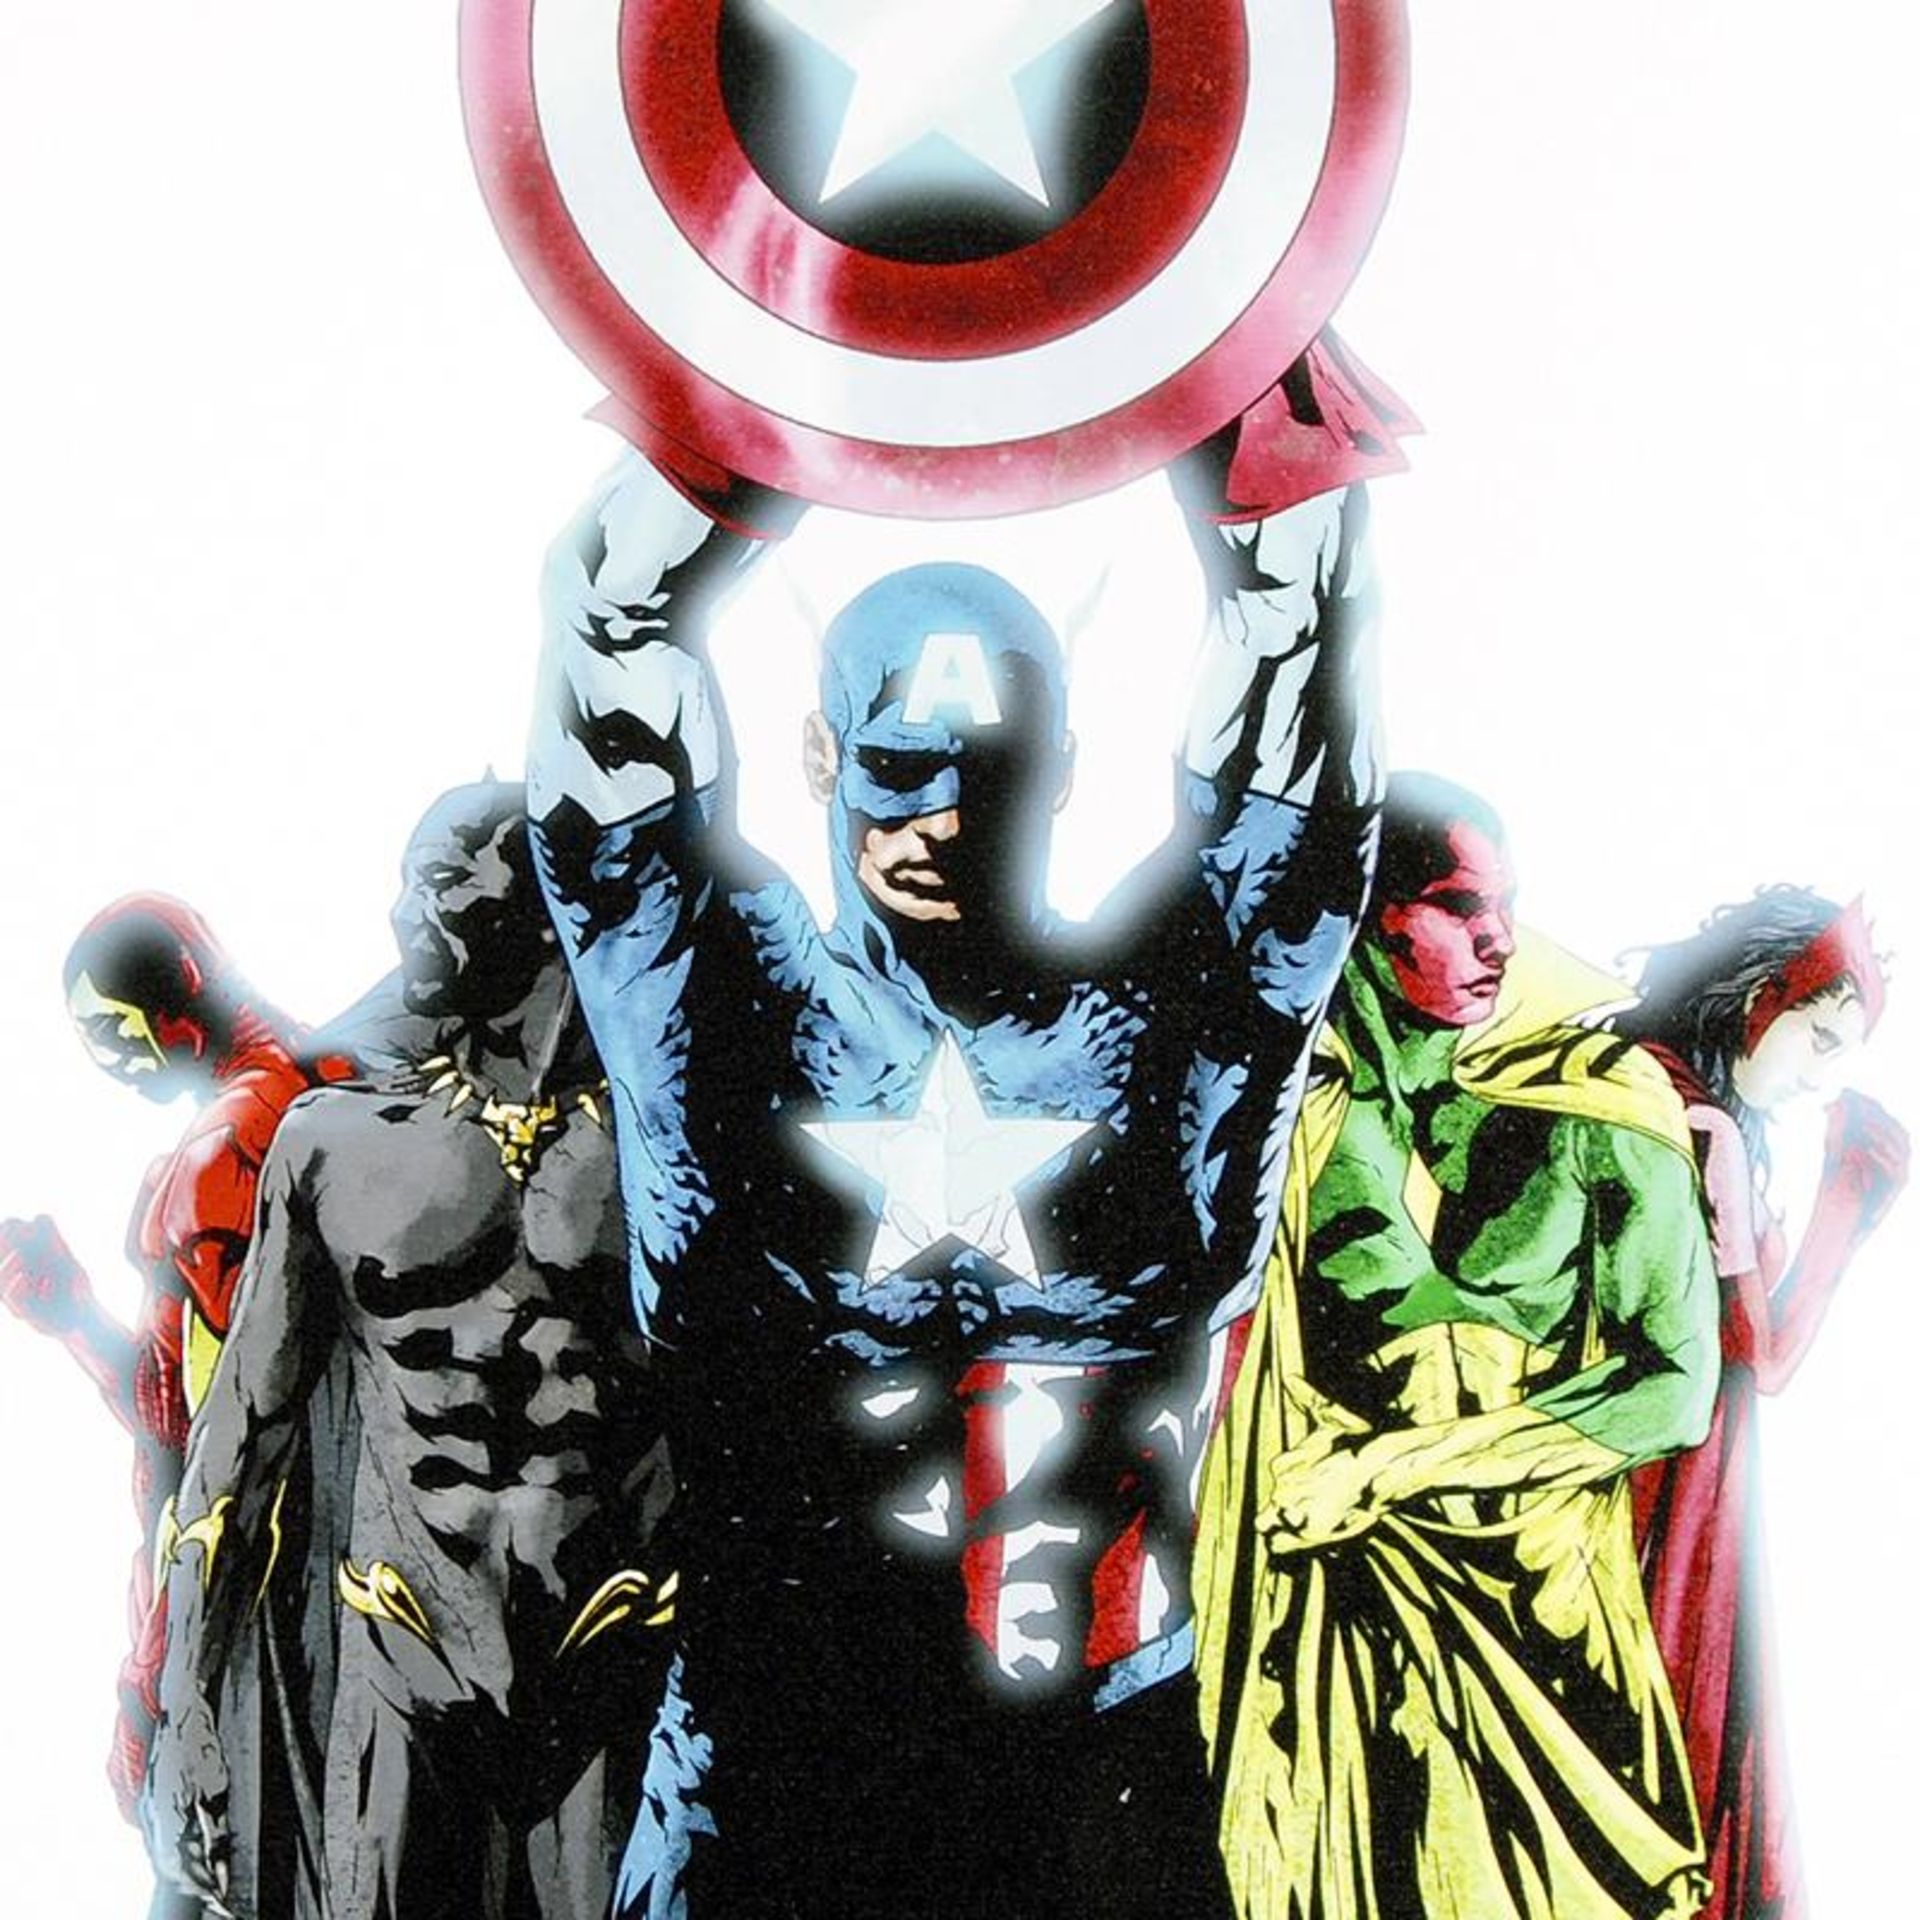 Marvel Comics, "Avengers #491" Numbered Limited Edition Canvas by Jae Lee with C - Image 2 of 2